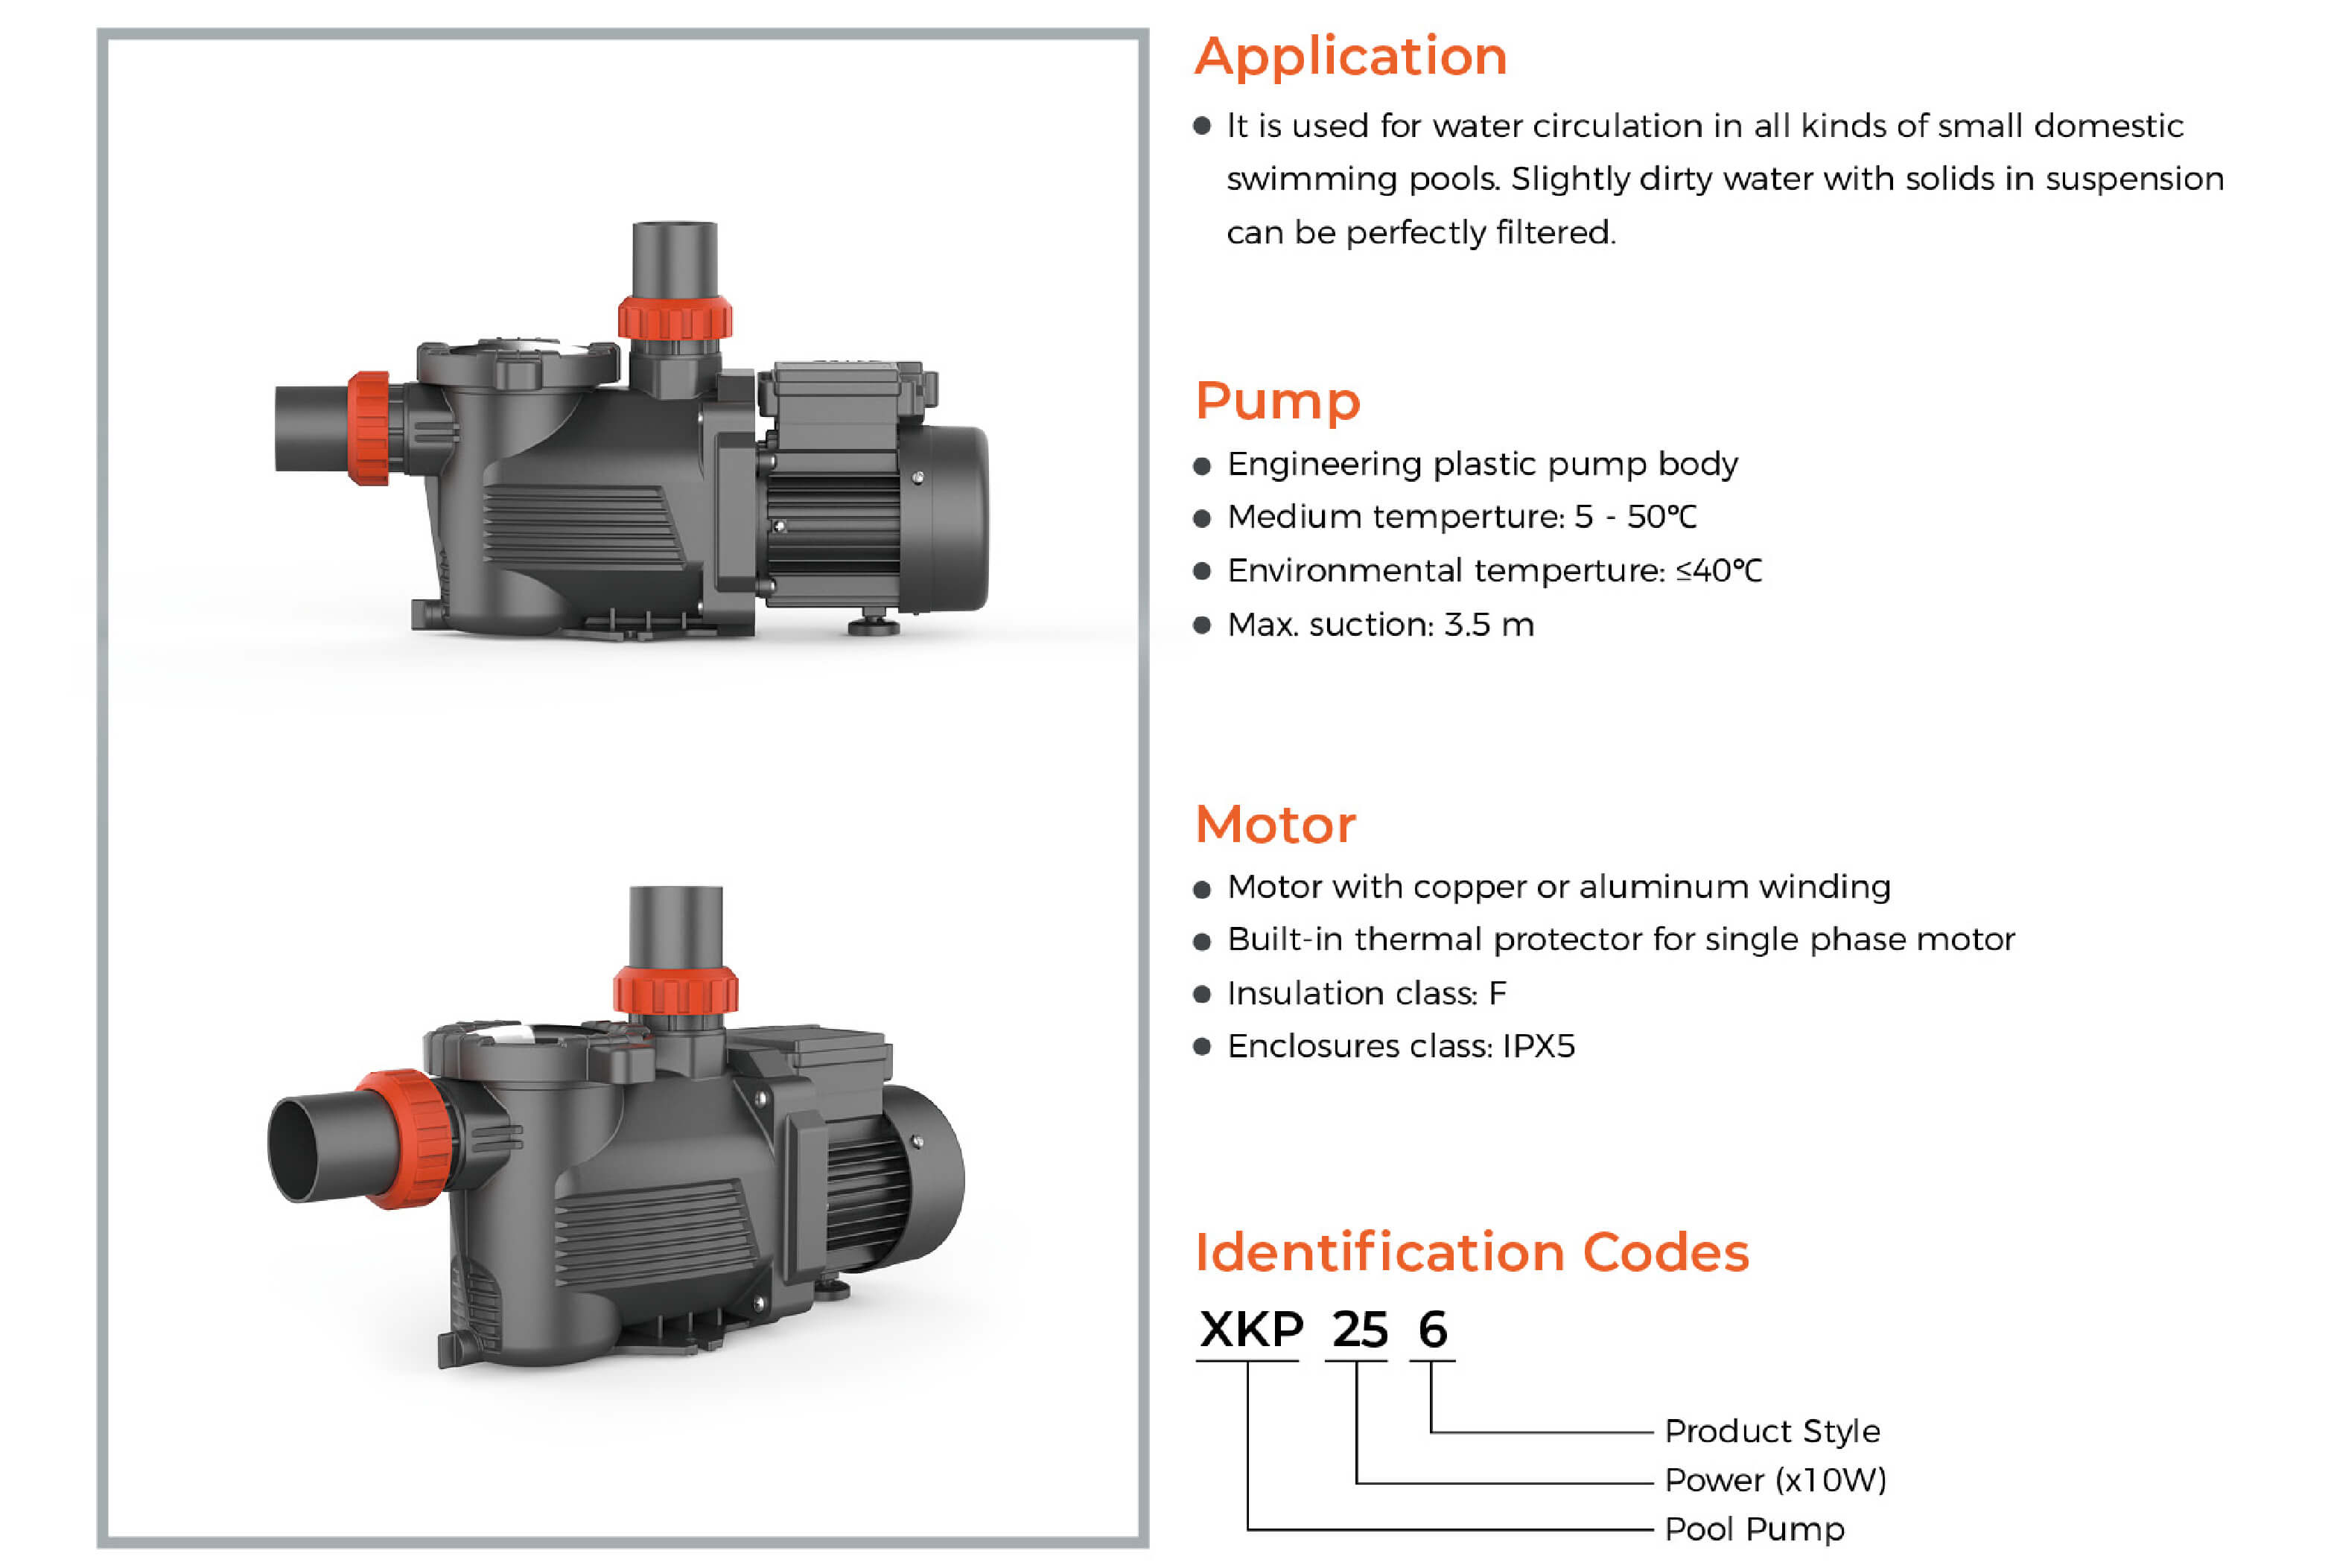 XKP-6 Pool Pump Features